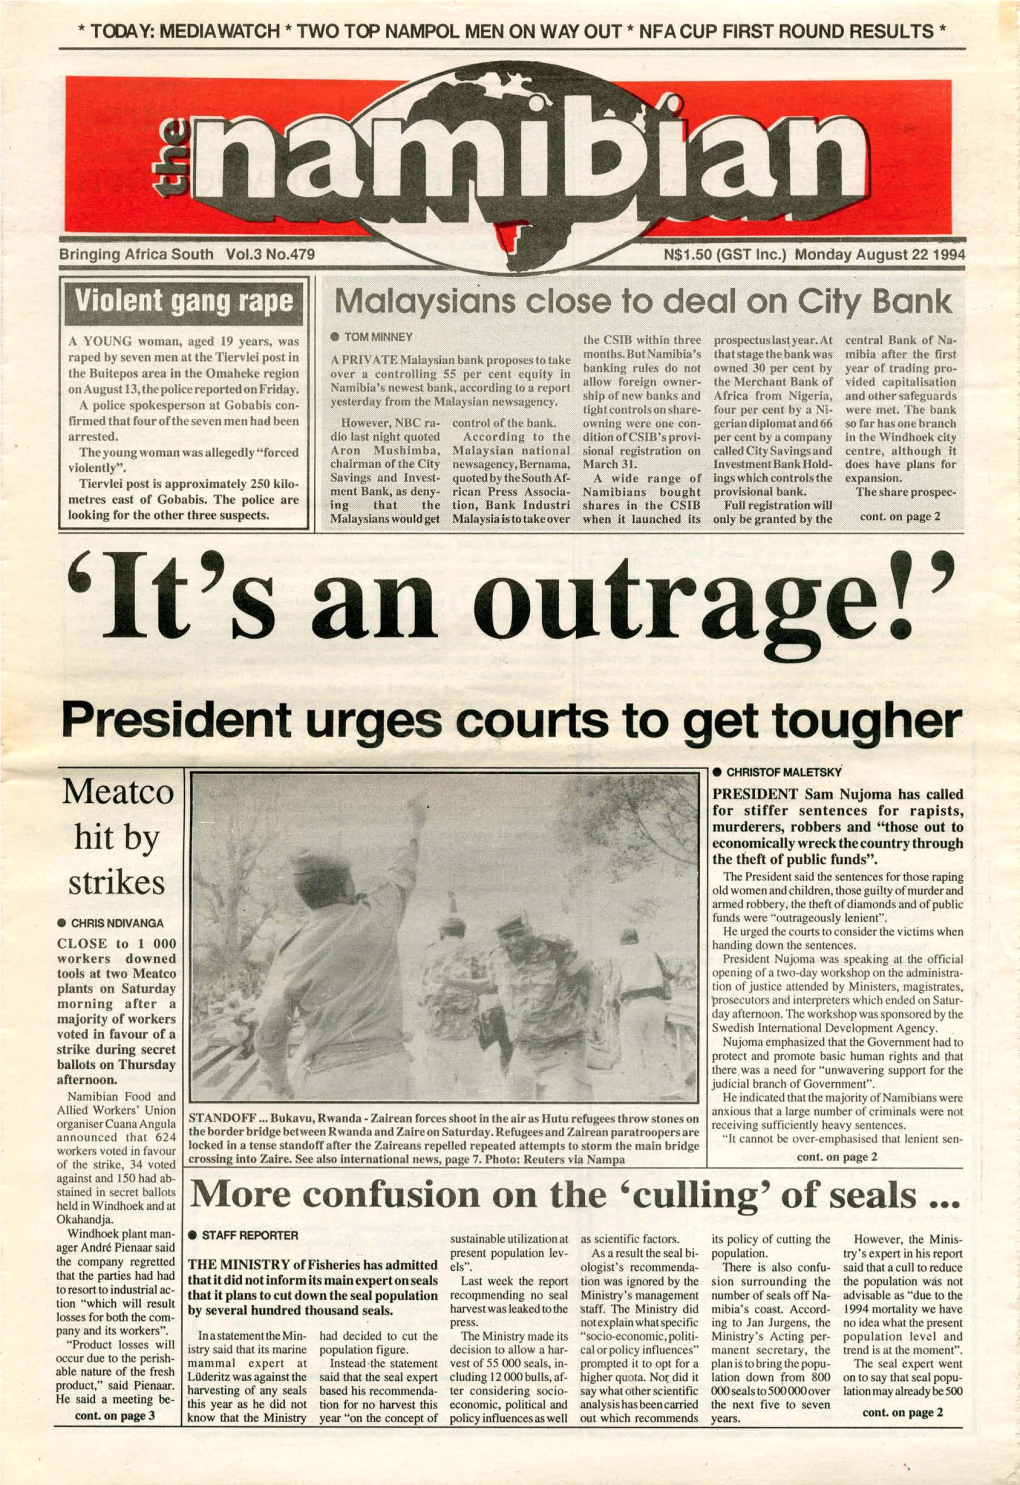 22 August 1994